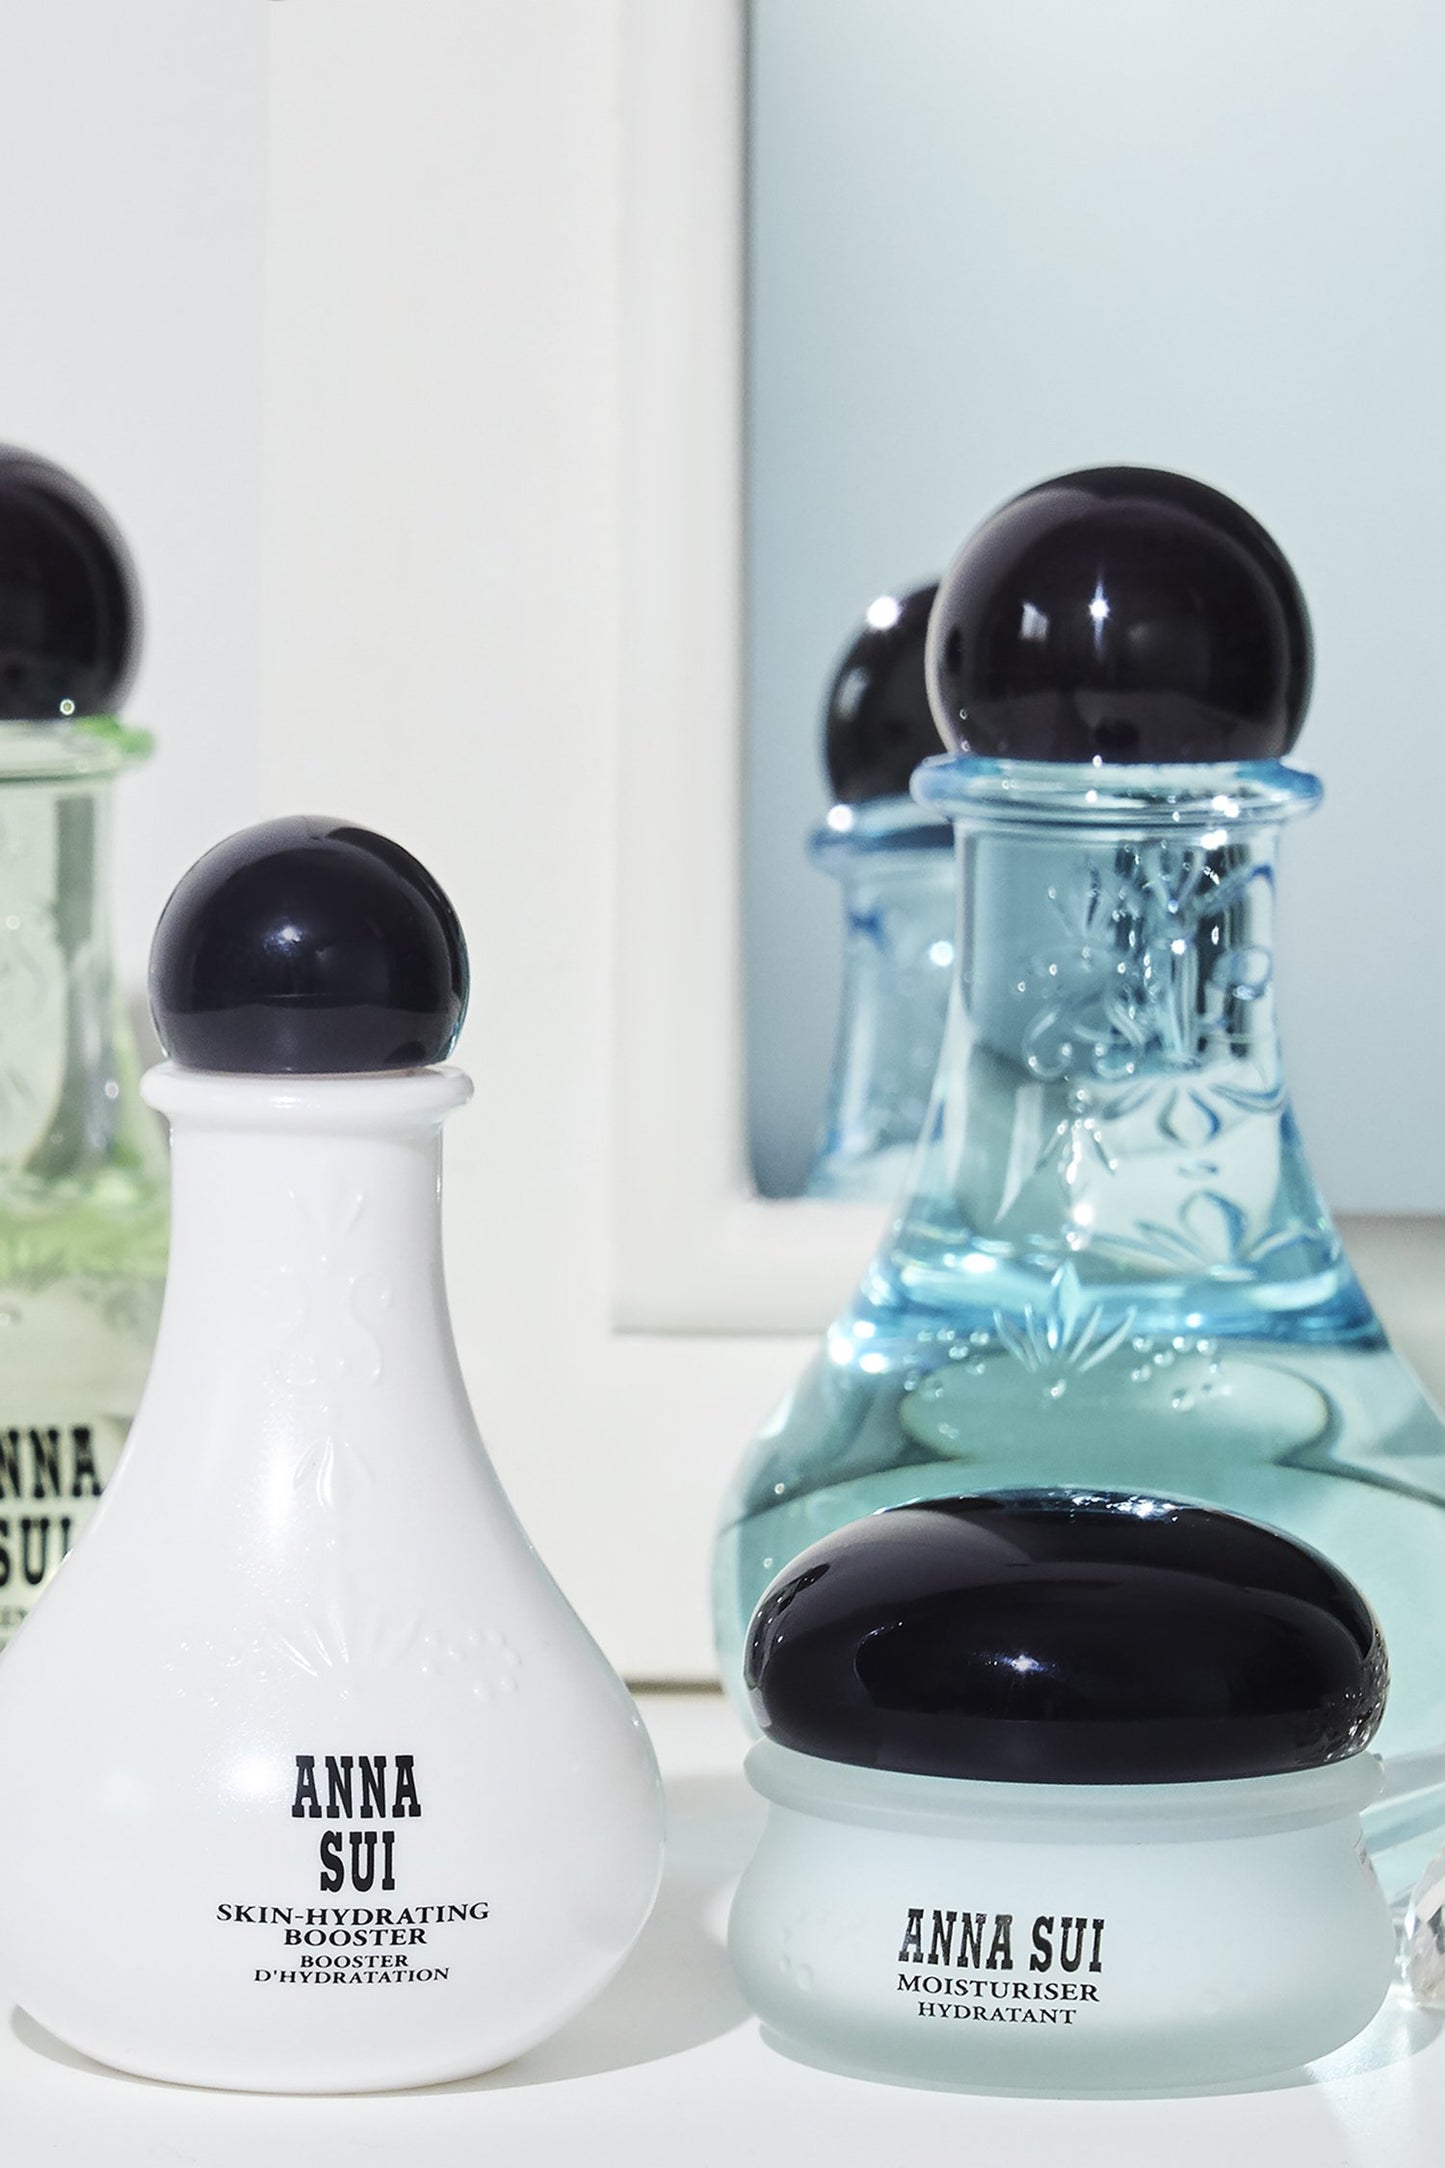 Skin-Hydrating Booster, Anna Sui Moisturizer Hydratant, decorating bottle, in a bathroom décor